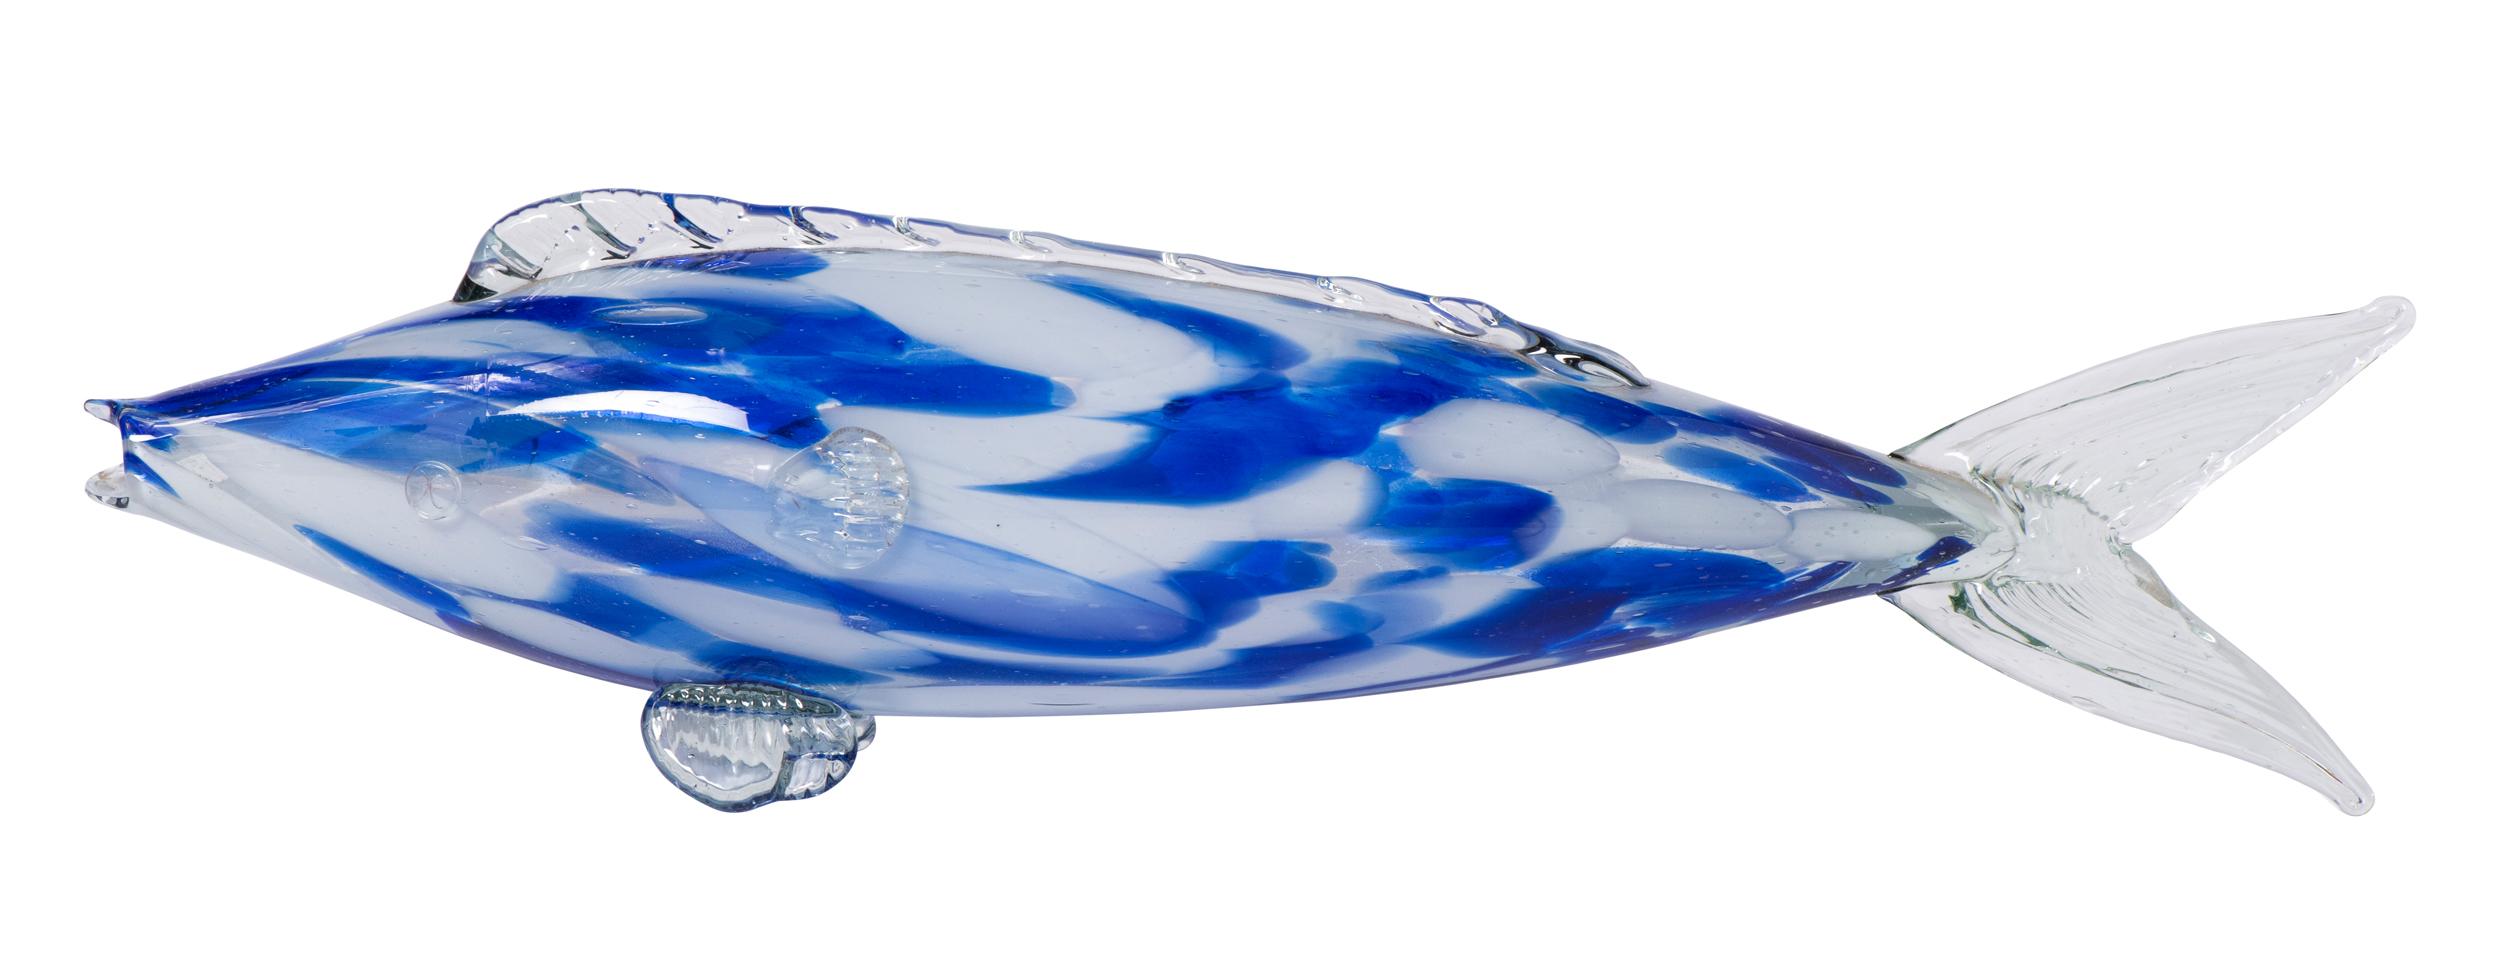 A medium Murano glass fish.
Clear, blue and white glass.
Beautifully blown with moulded fin detail.
Italy, circa 1970
Measures: 38 cm wide x 8 cm deep x 12 cm high.